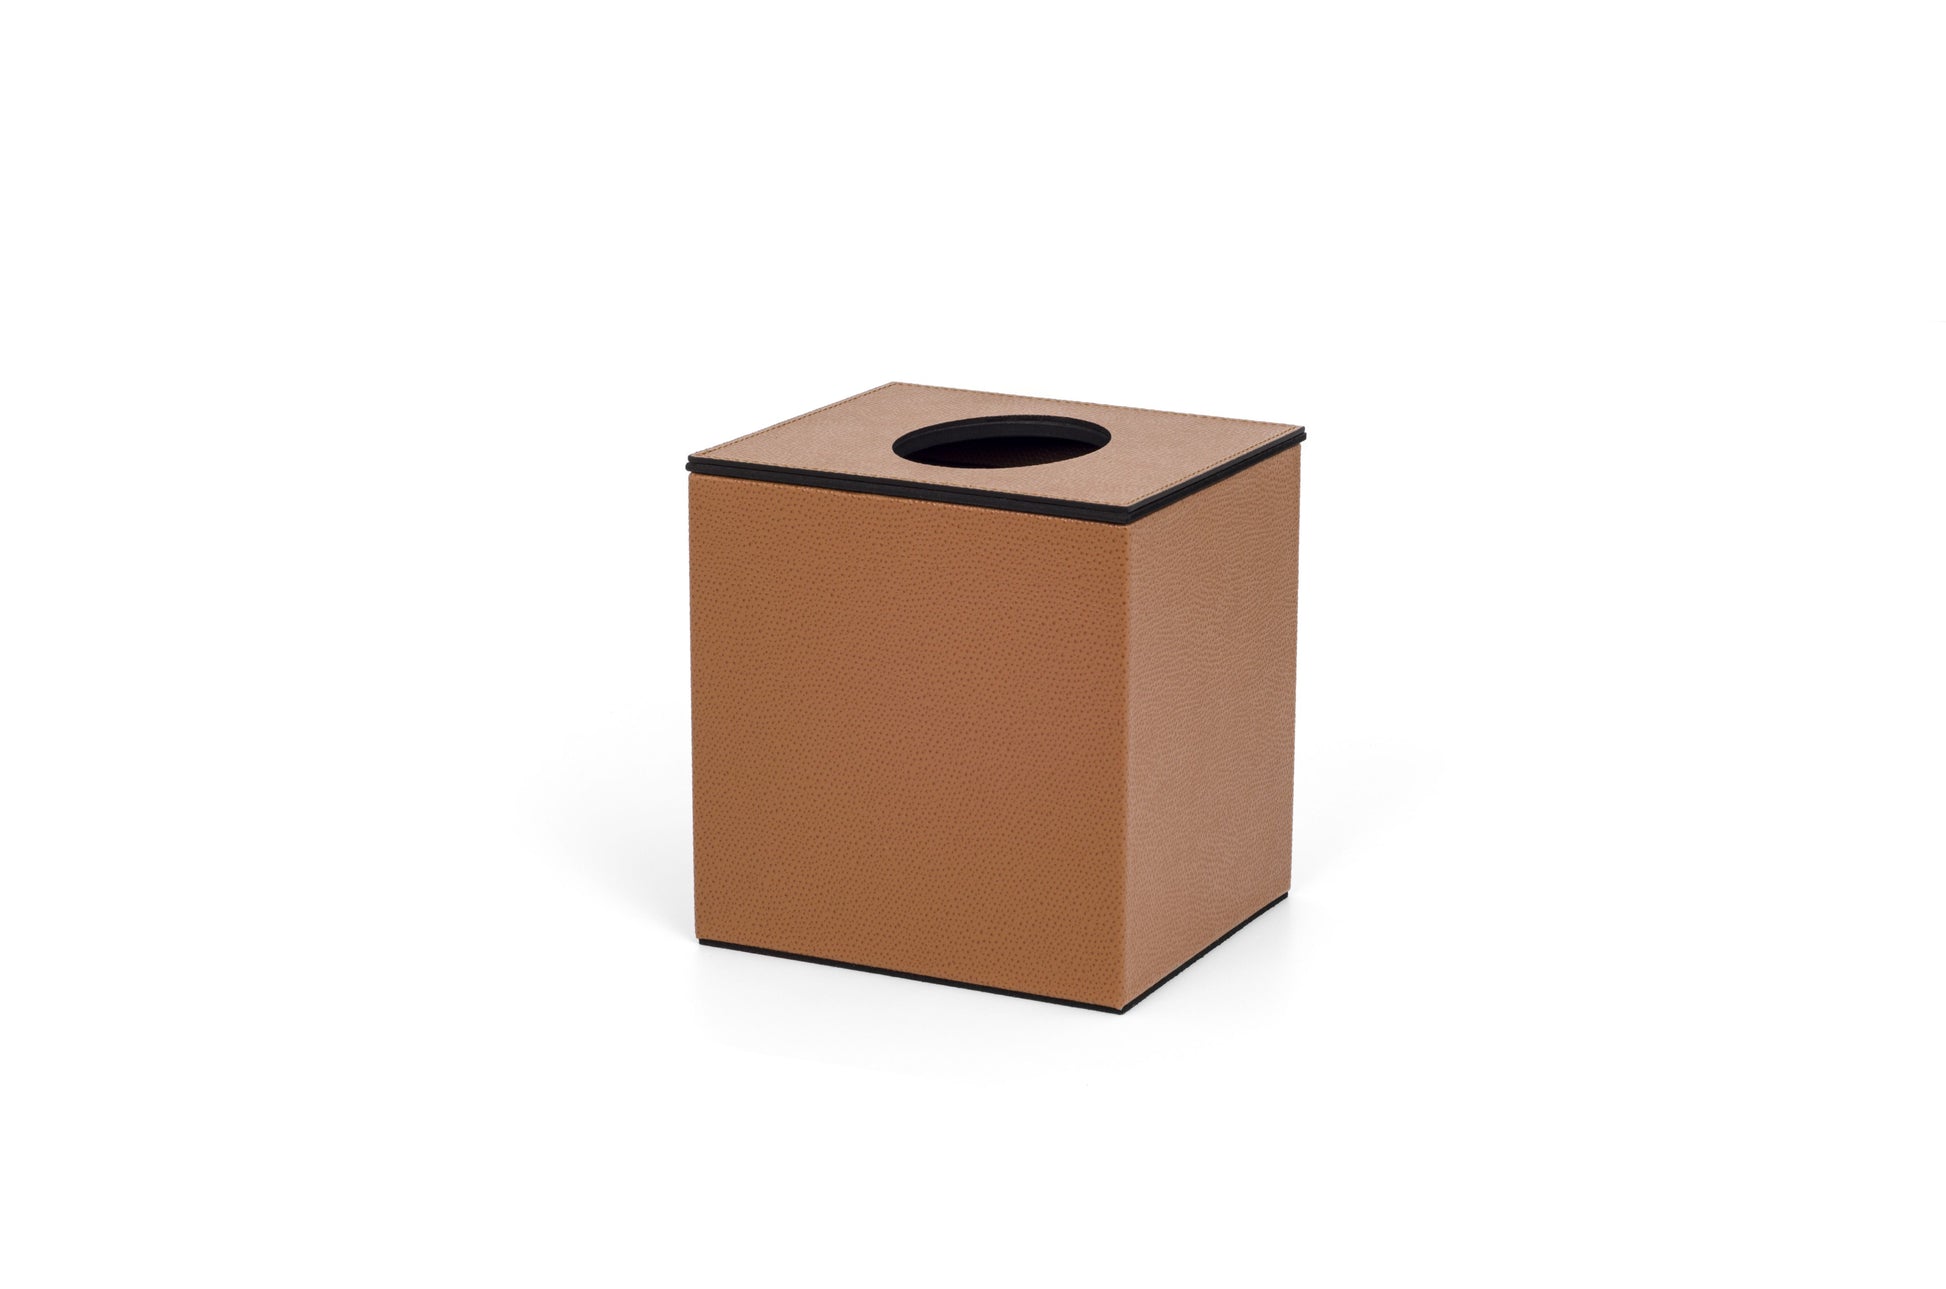 Pinetti Leather-Covered Wood Tissue Box With Magnetic Closure Lid | Stylish and Functional Design | Perfect for Home or Office Use | Explore a Range of Luxury Home Accessories at 2Jour Concierge, #1 luxury high-end gift & lifestyle shop